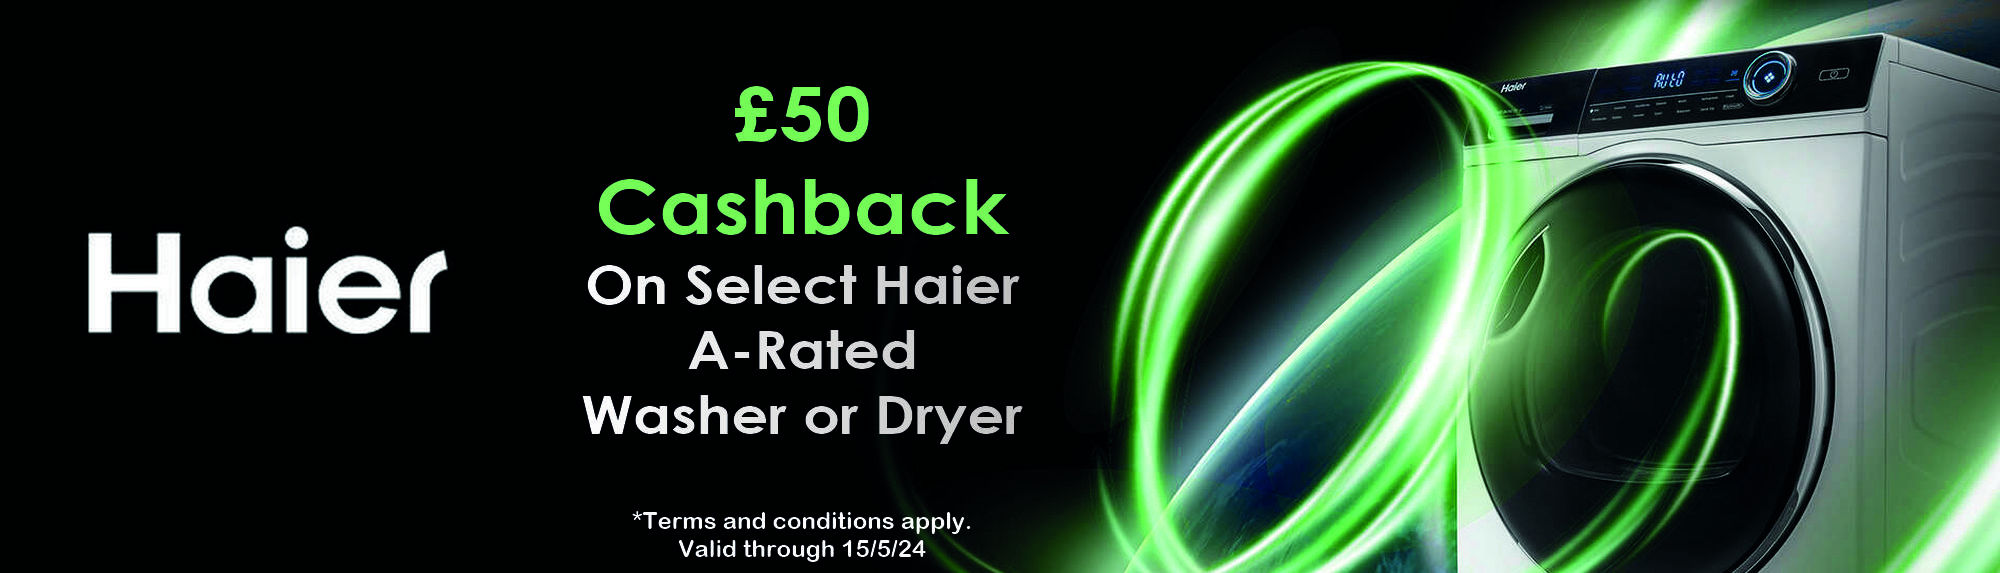 Haier £50 Cashback on A Rated Washer or Dryer at Walkers Scarborough